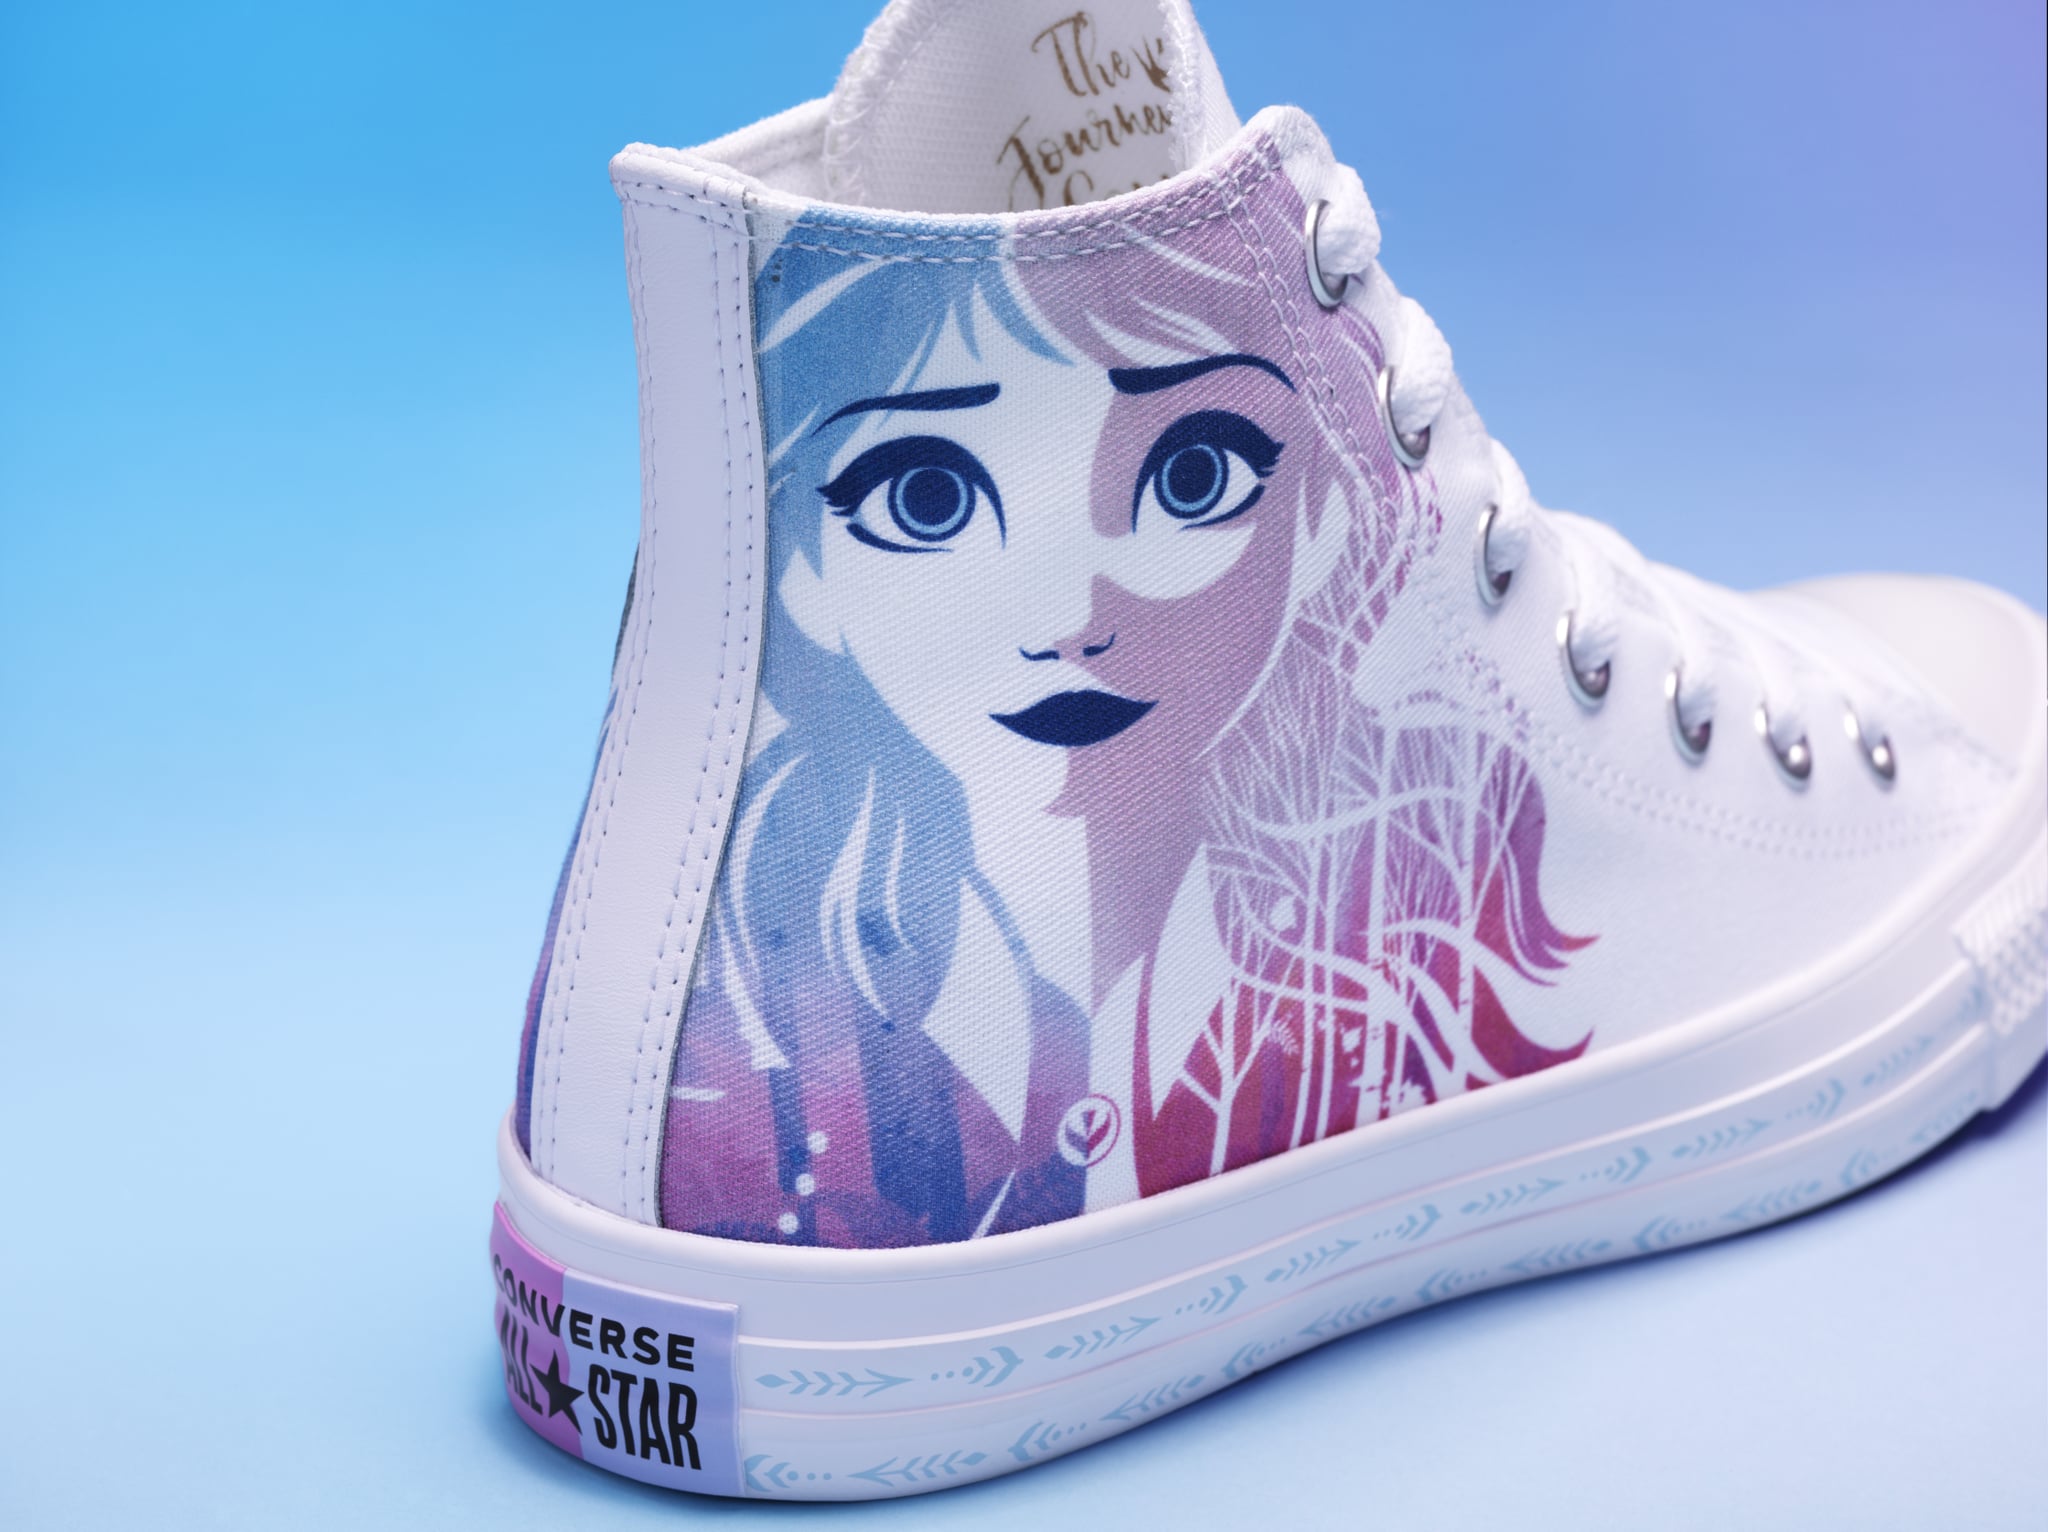 disney sneakers for adults